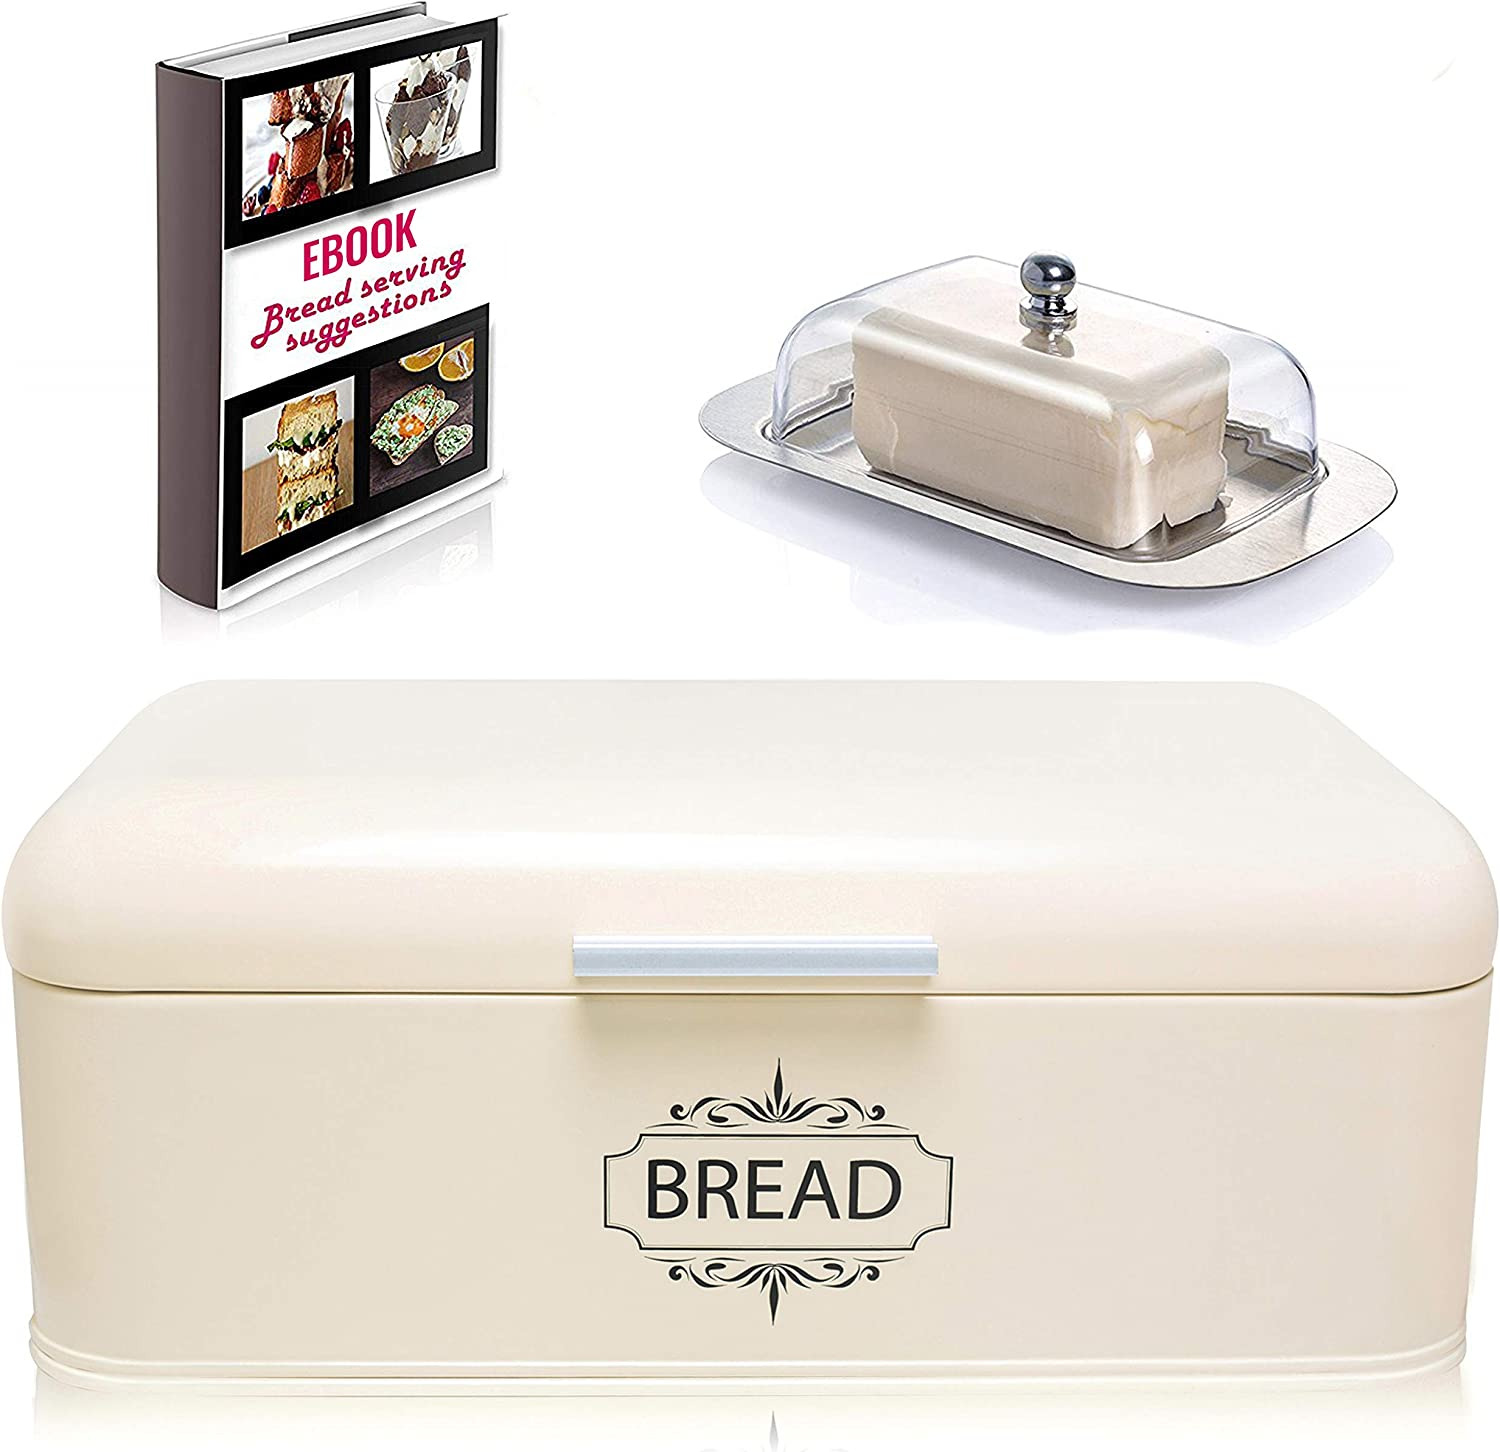 Vintage Look Bread Box for Kitchen Stainless Steel Metal in Retro Cream off Whit